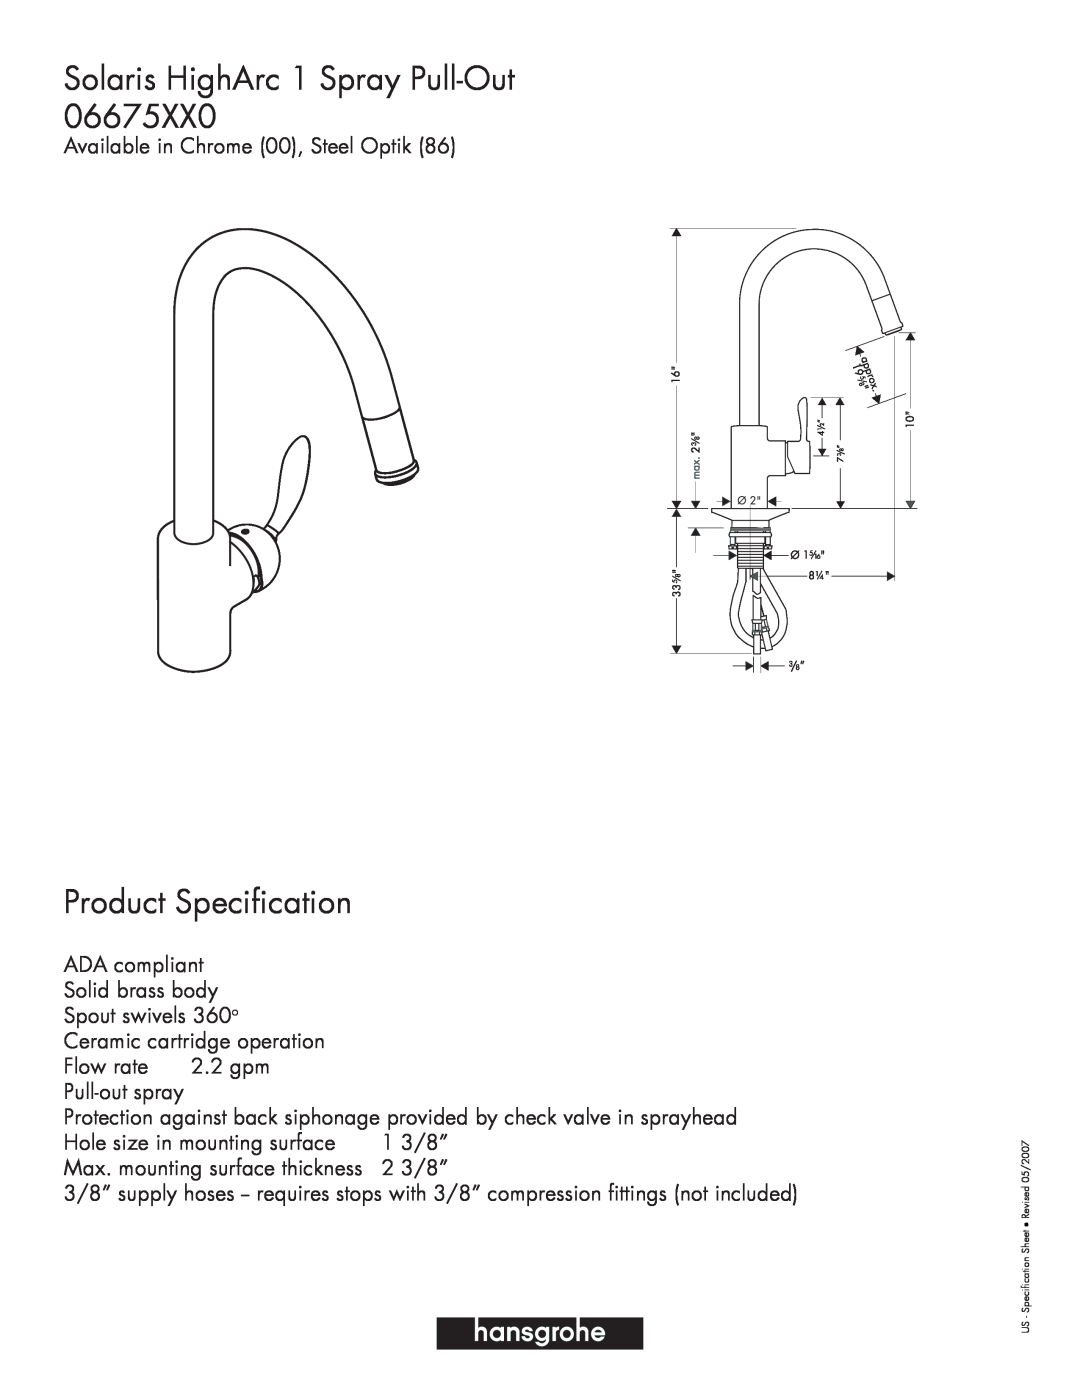 Hans Grohe 06675XX0 specifications Solaris HighArc 1 Spray Pull-Out, Product Specification 